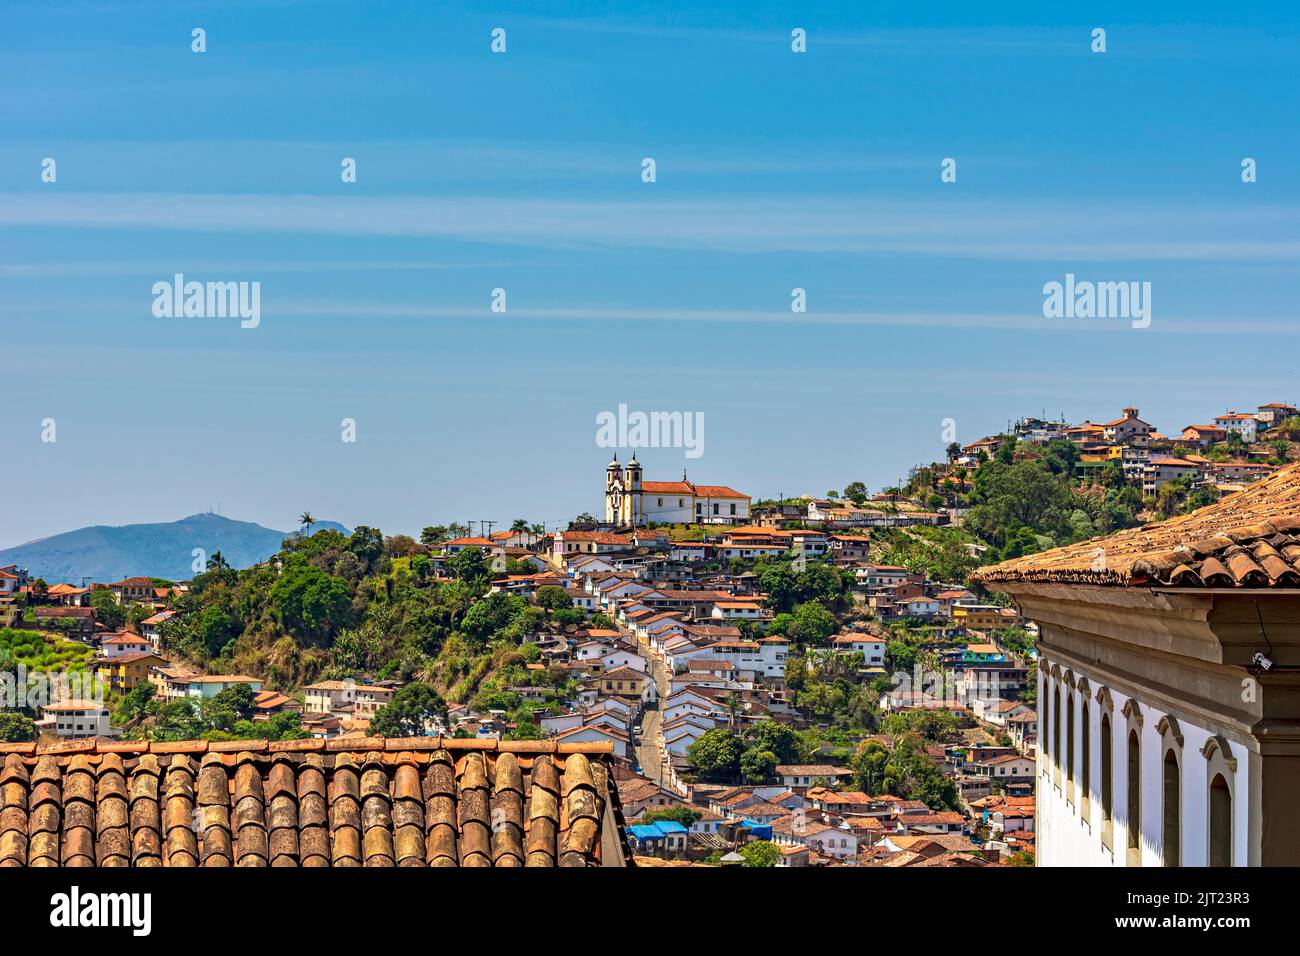 View of the houses, roofs, hills and churches of the historic city of Ouro Preto in Minas Gerais, Brazil Stock Photo